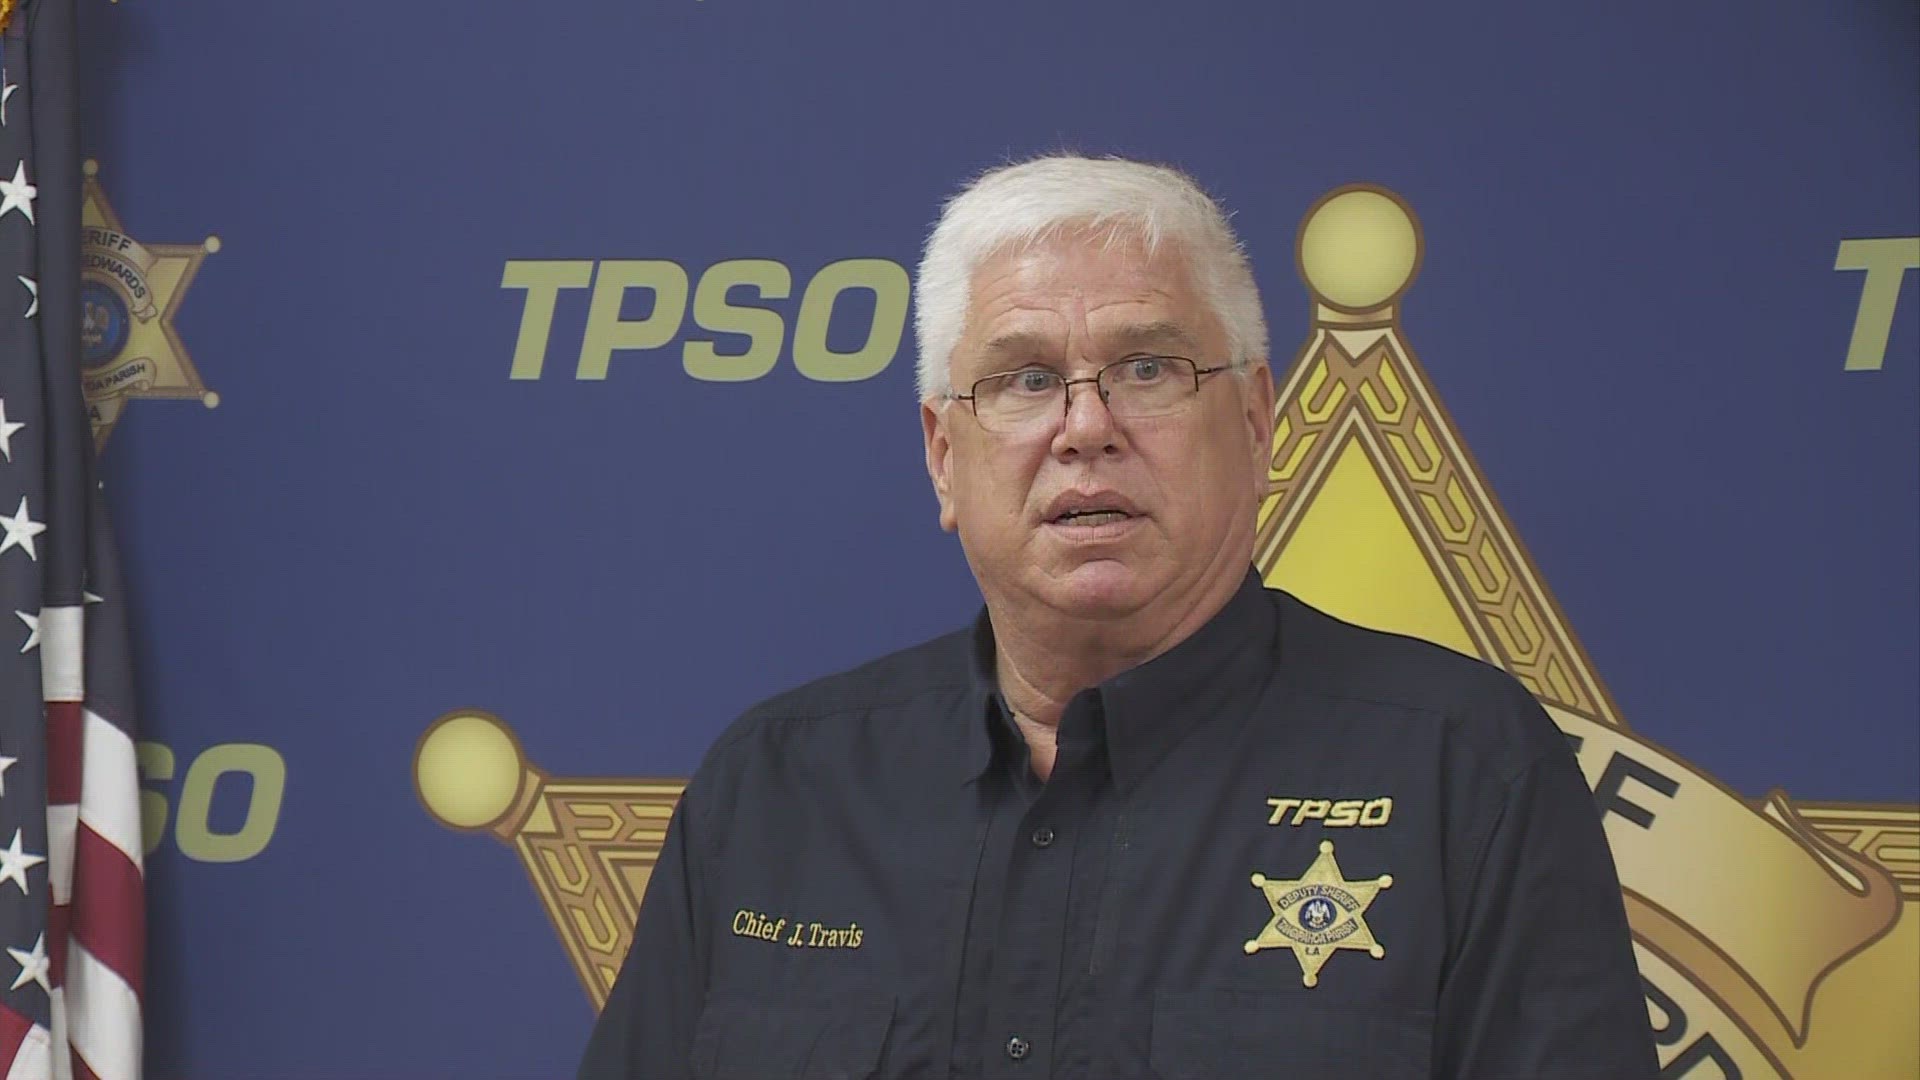 Tangipahoa Parish Sheriff's Office Chief Jimmy Travis discusses a deadly carjacking this past weekend.